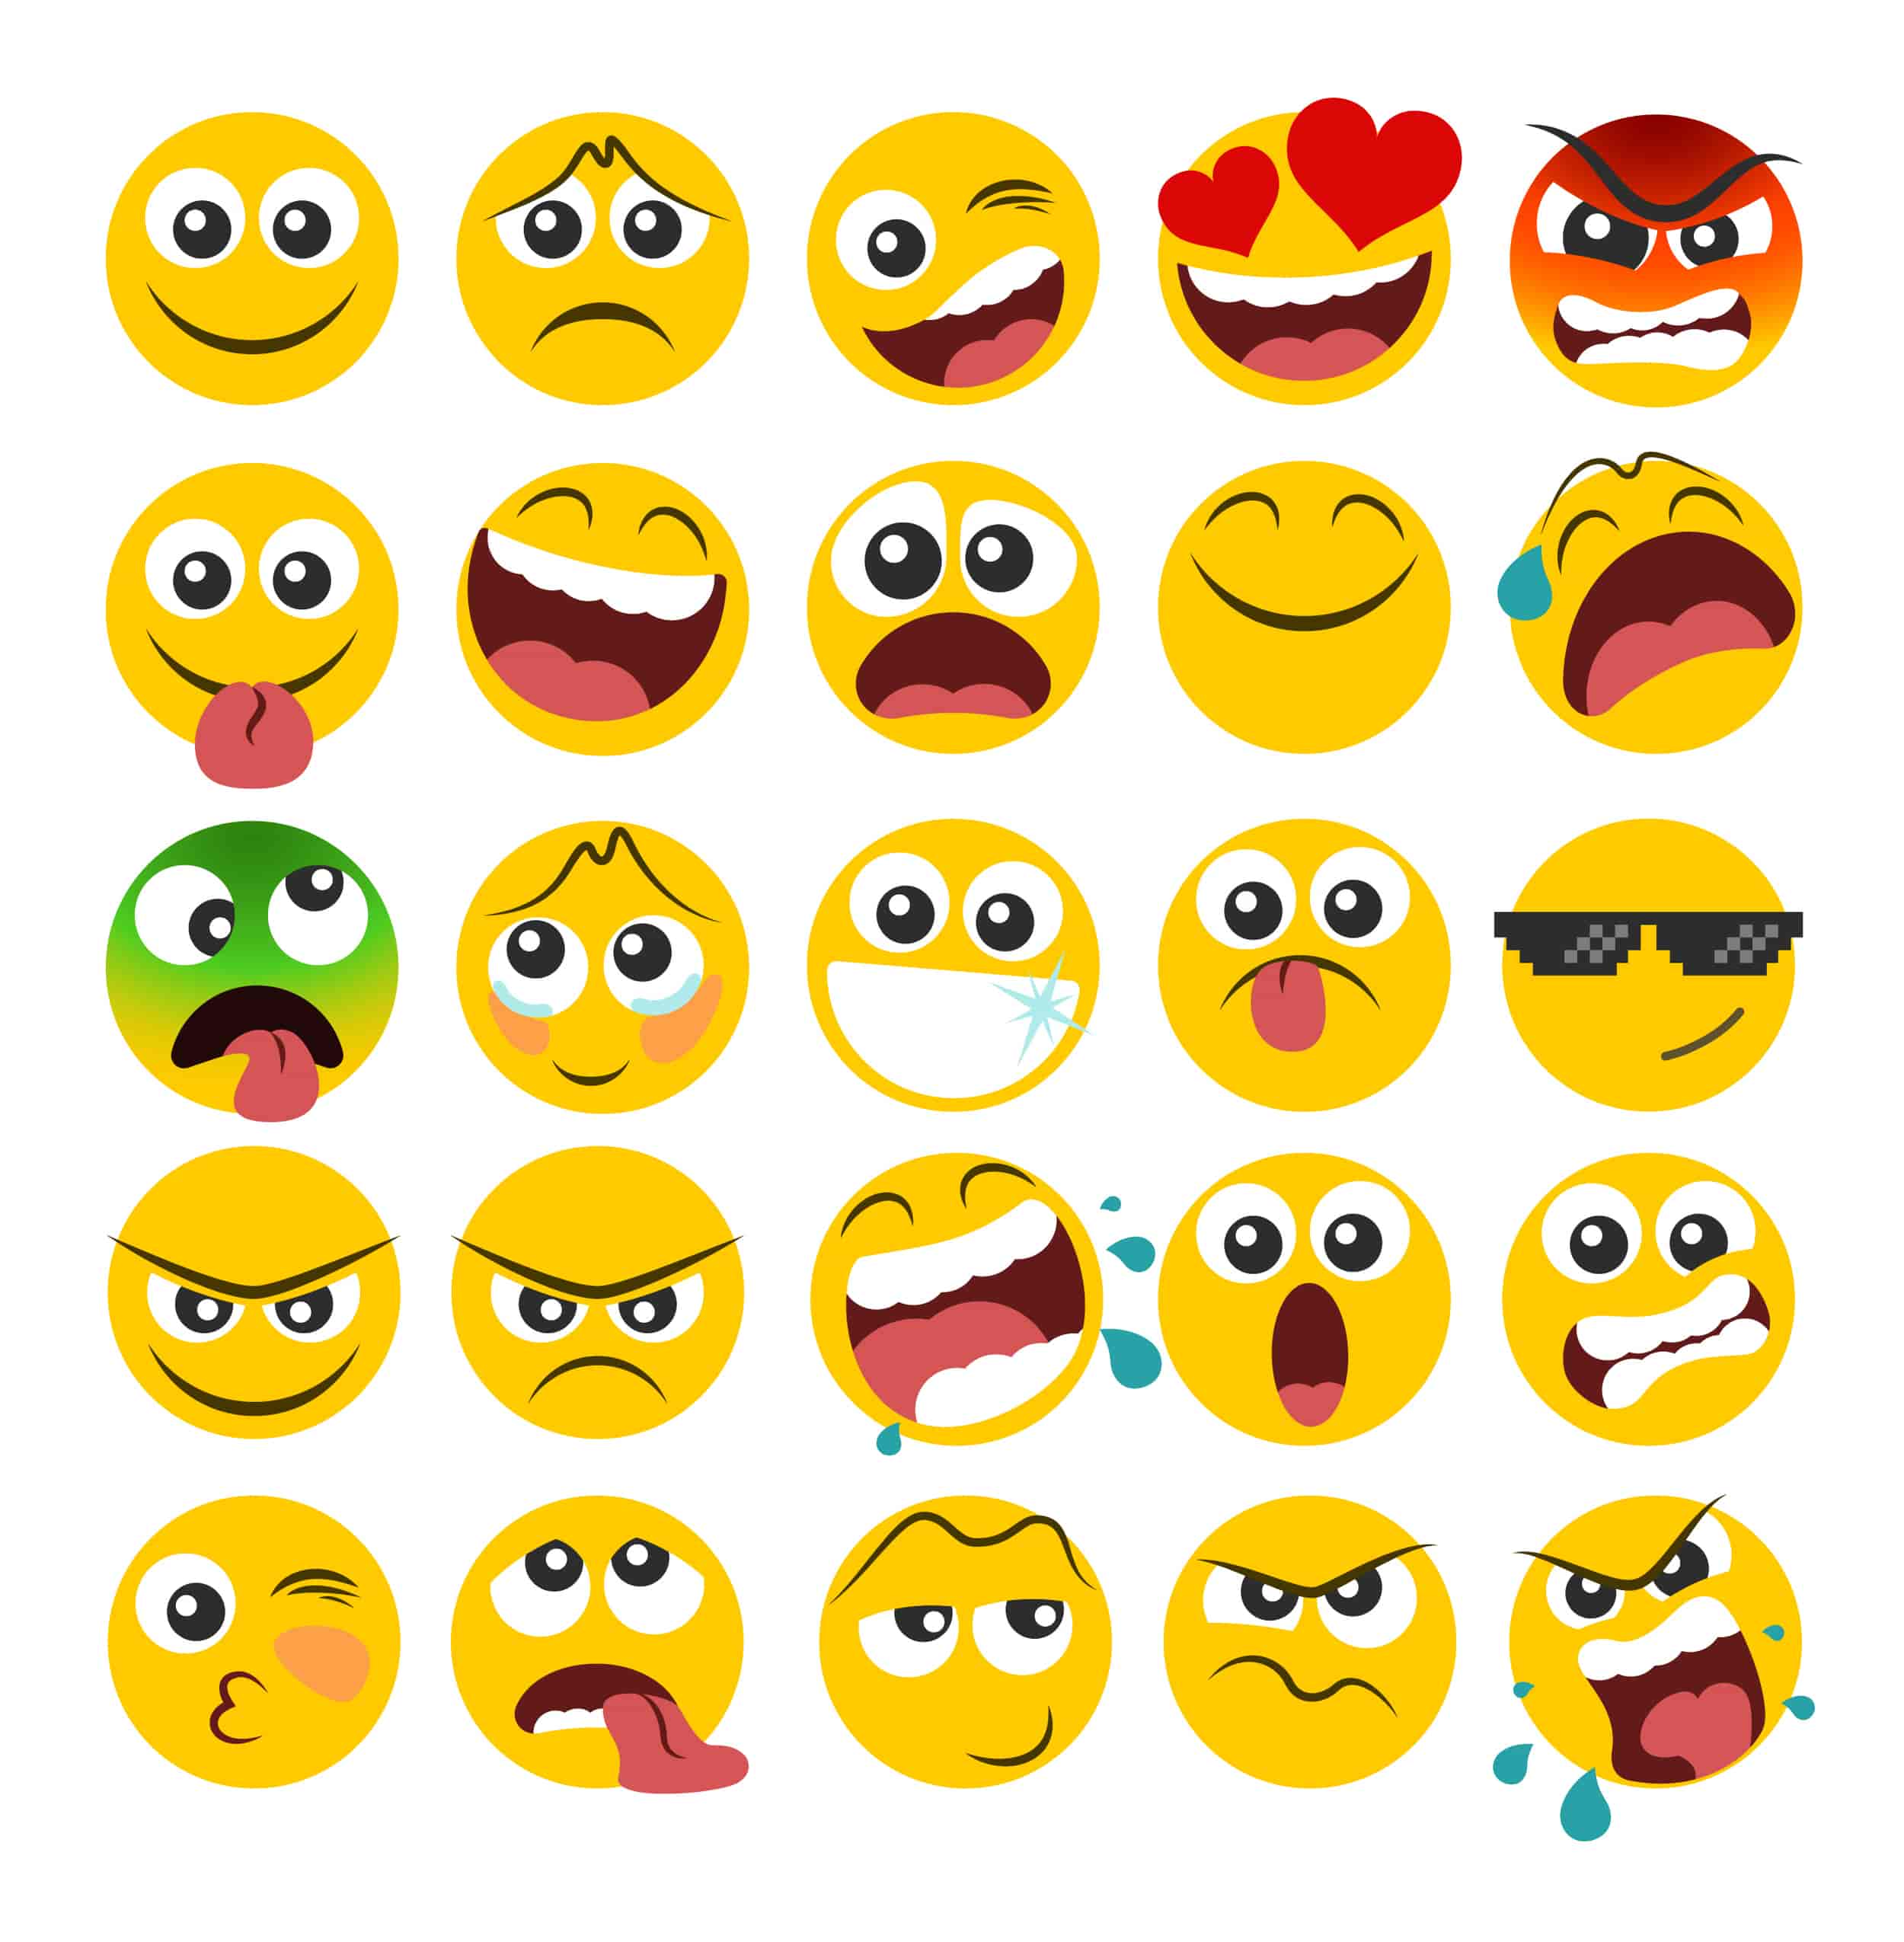 Expression of emotions